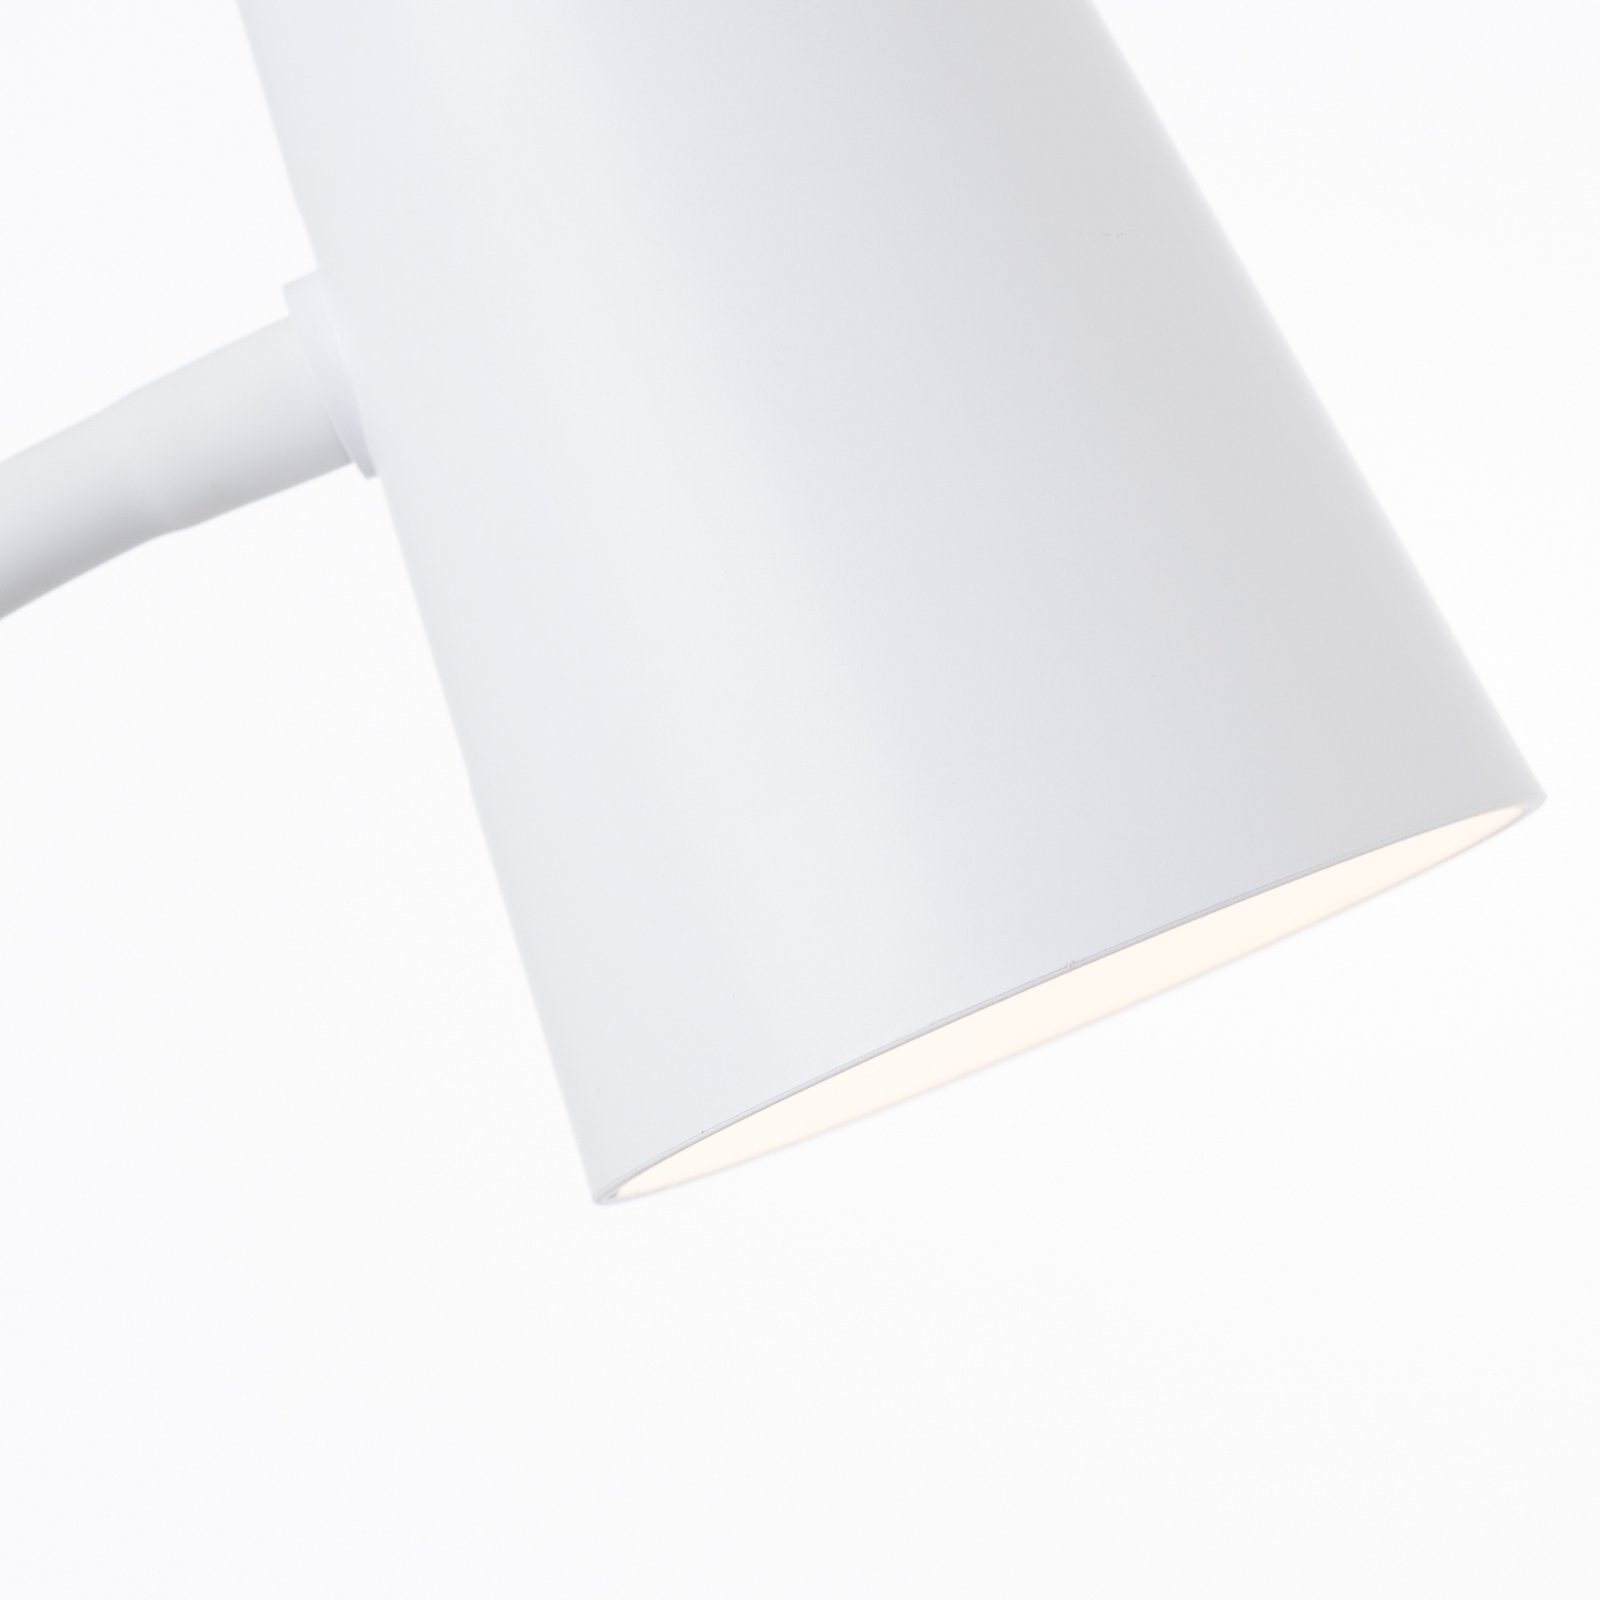 Adda LED clip-on table lamp white 3-level dimmable